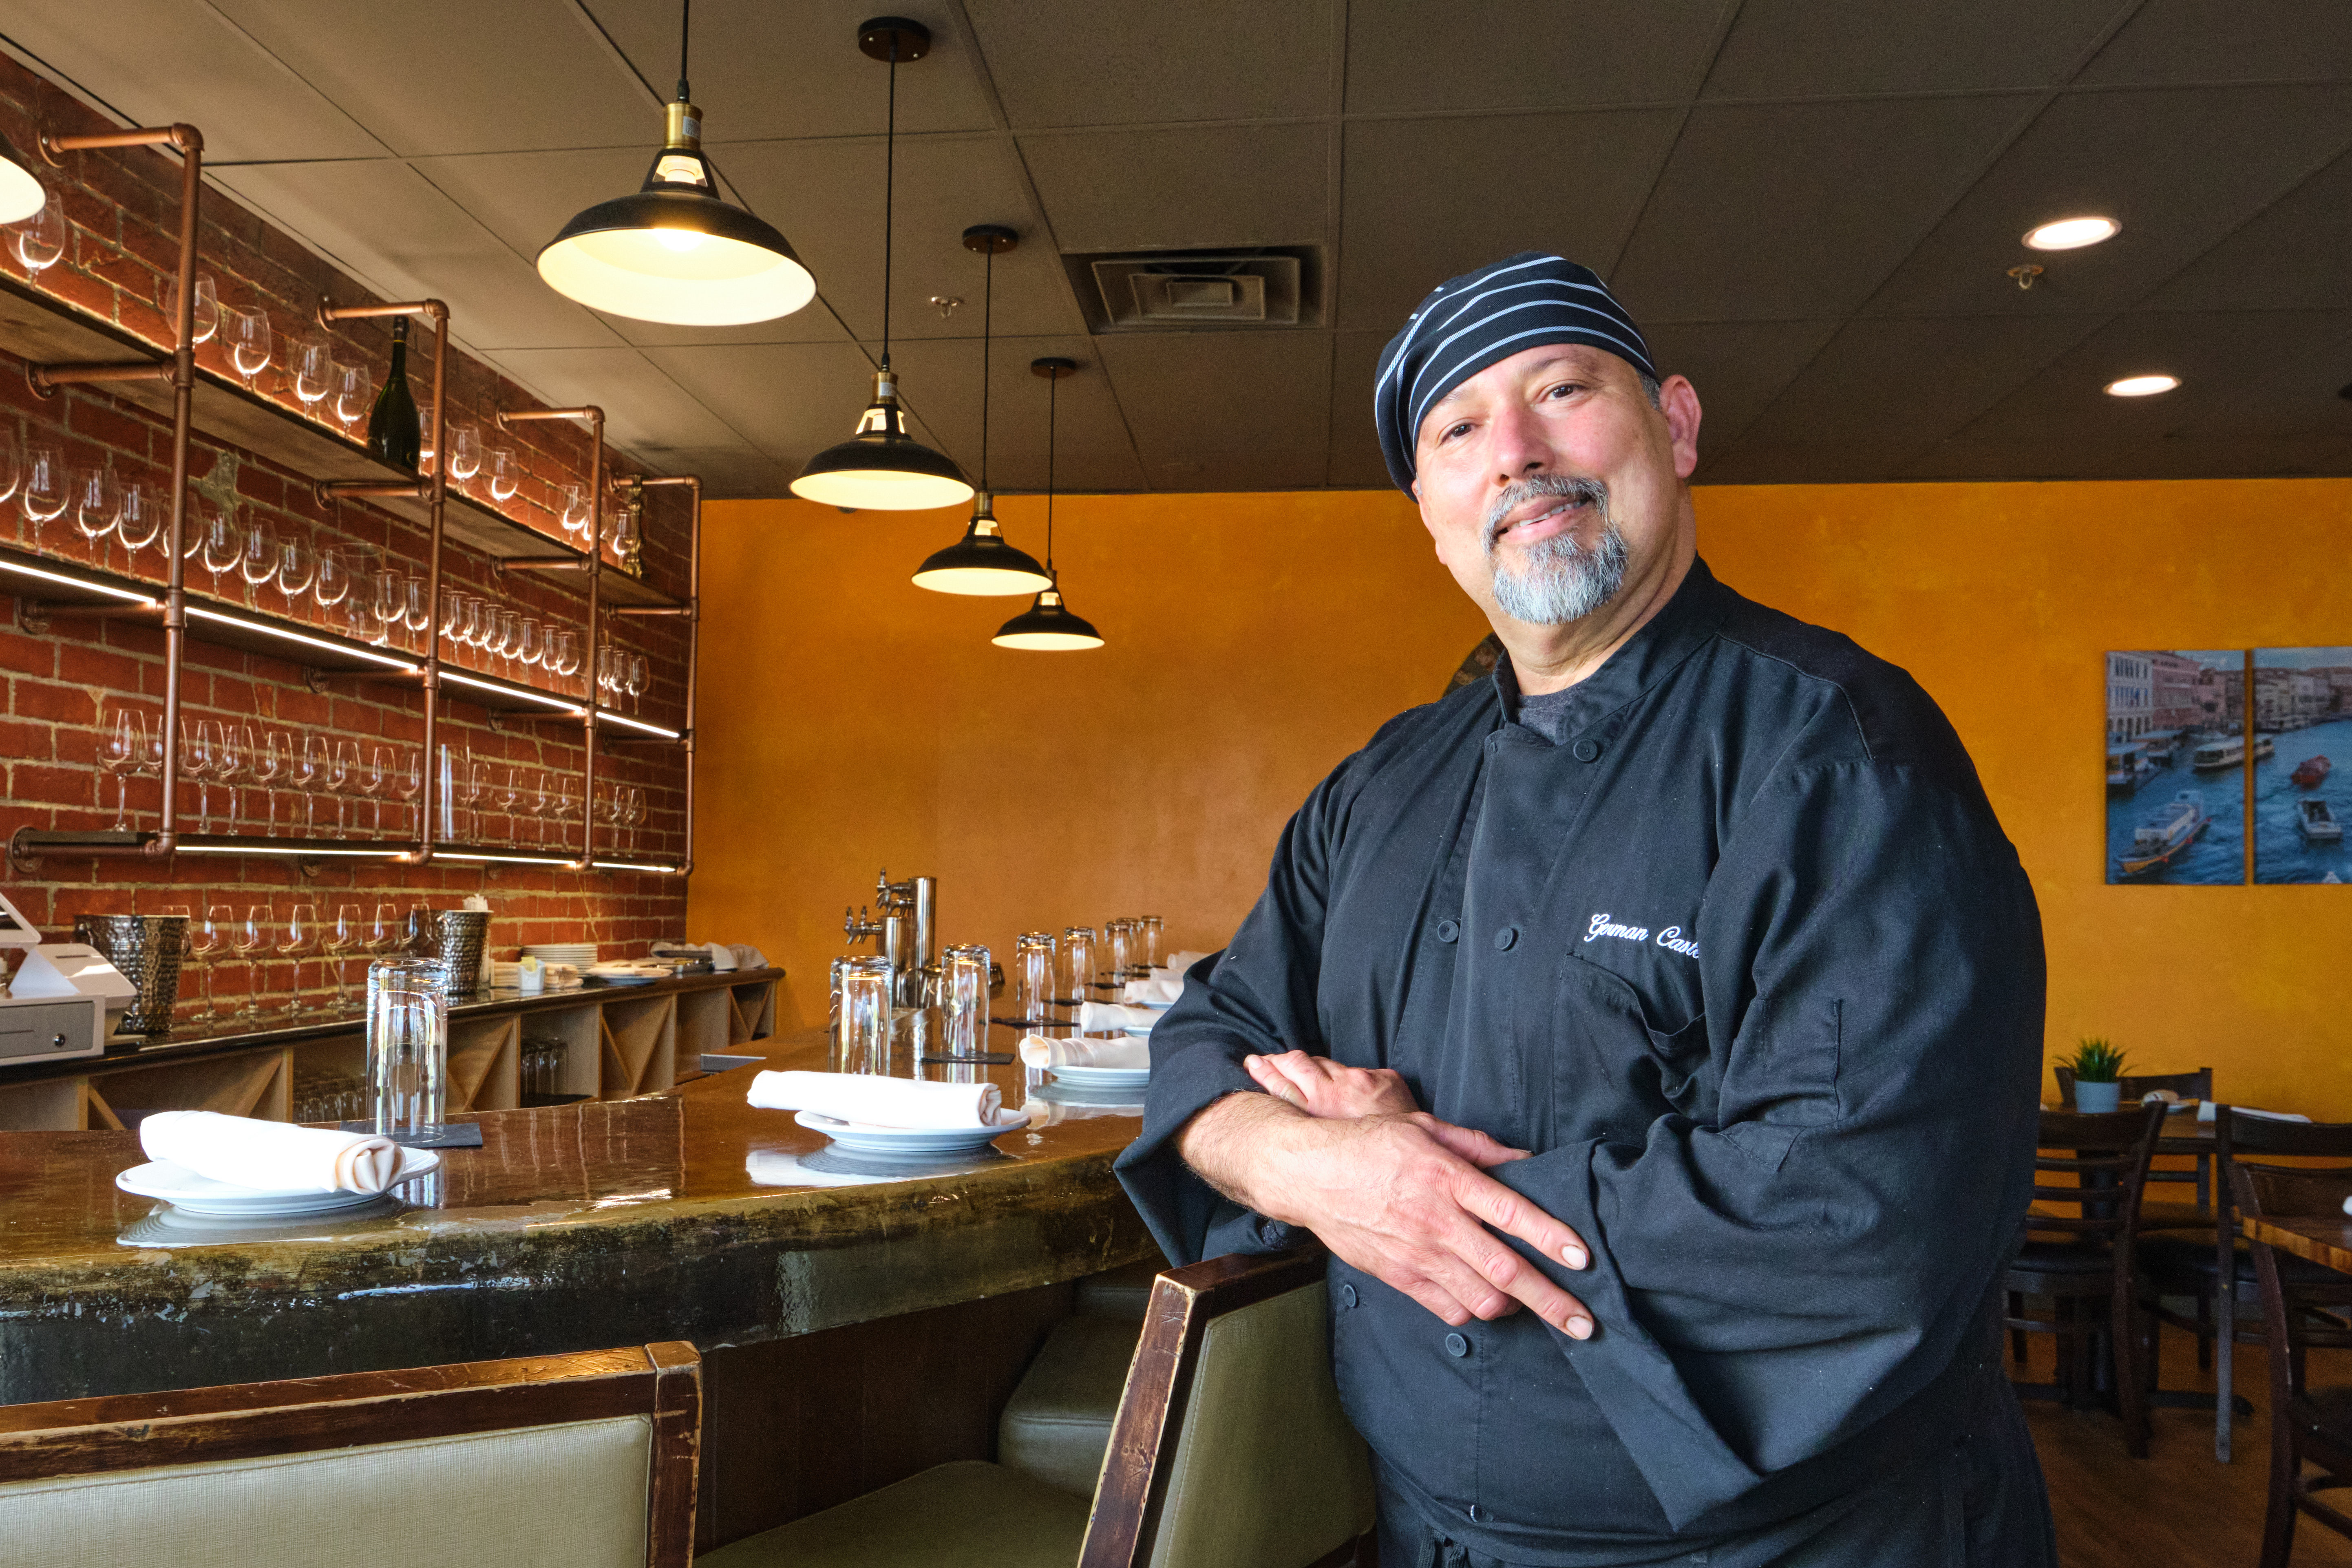 A chef in a black coat poses in front of a bar.